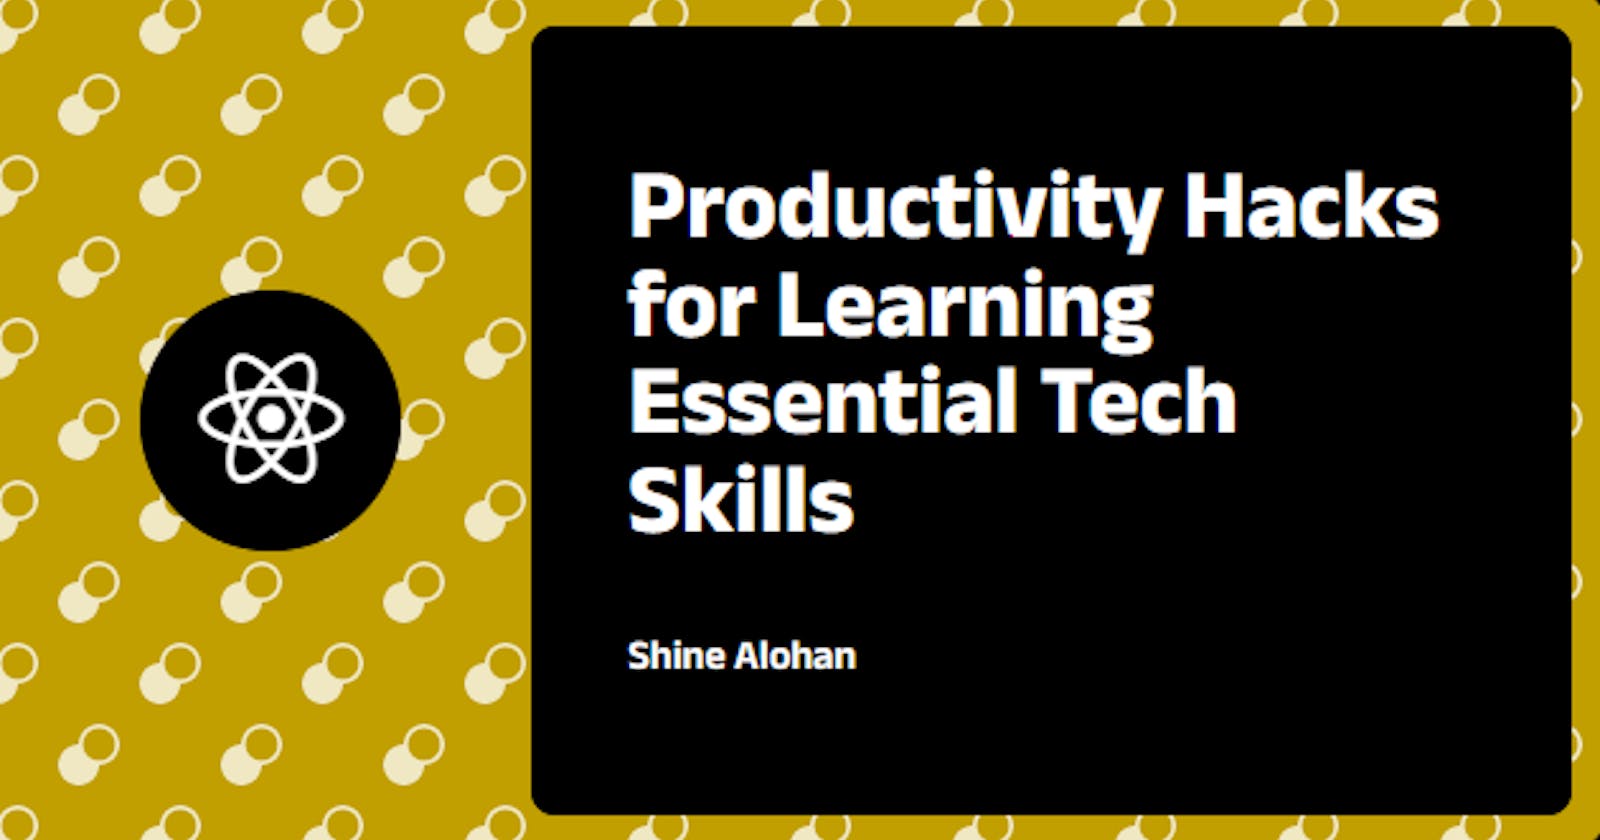 7 Productivity Hacks for Learning Essential Tech Skills